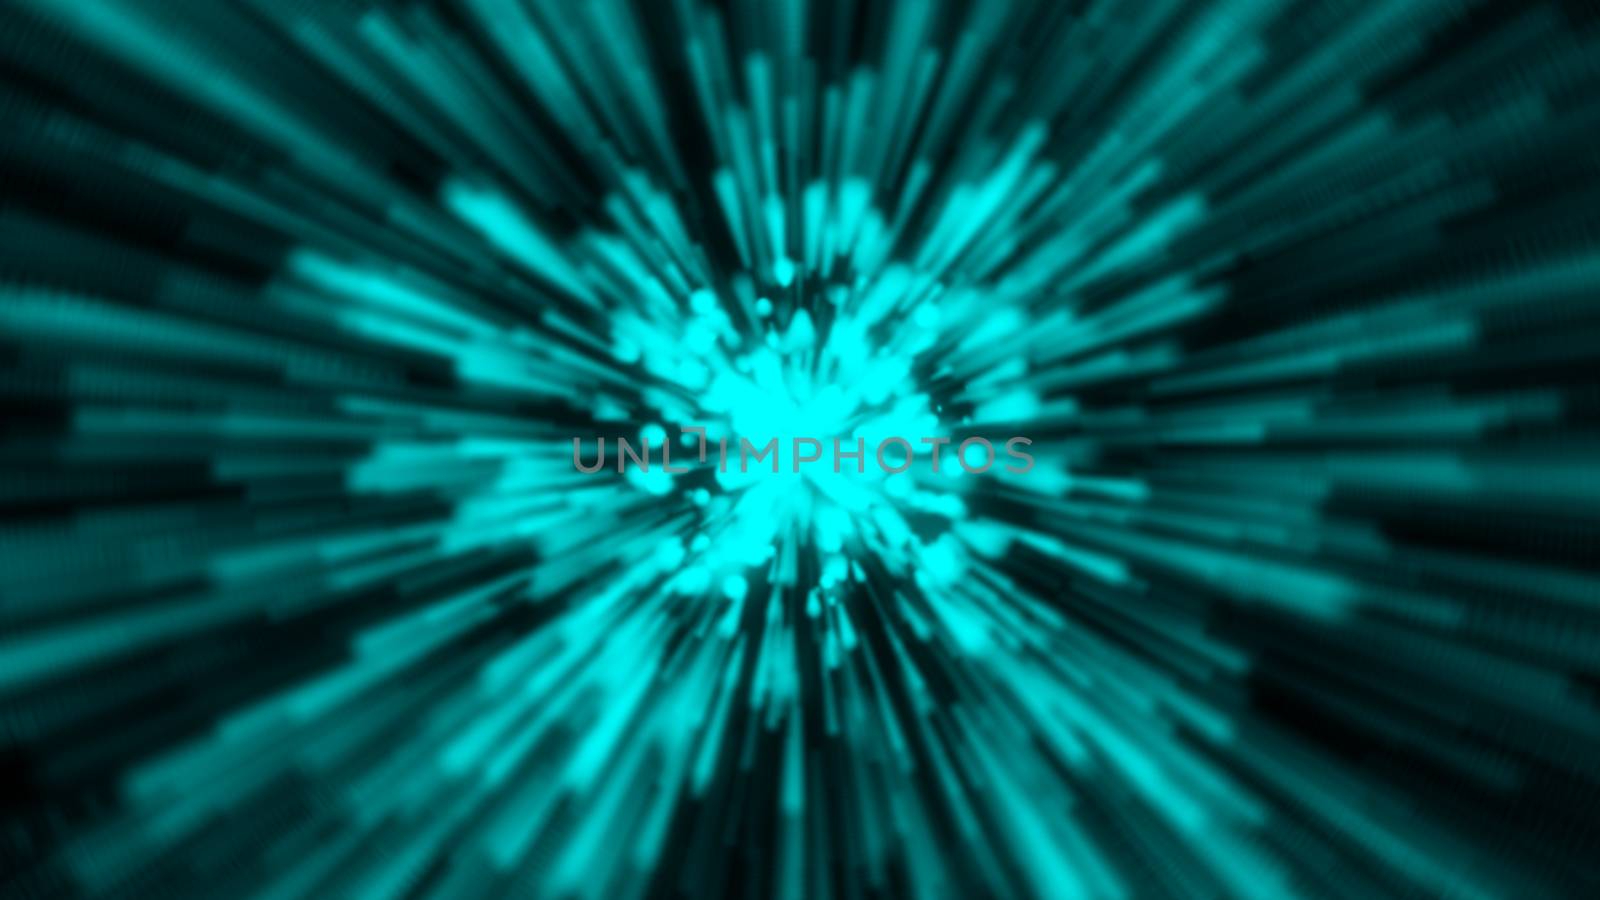 Particle or space traveling. Particle zoom background by nolimit046